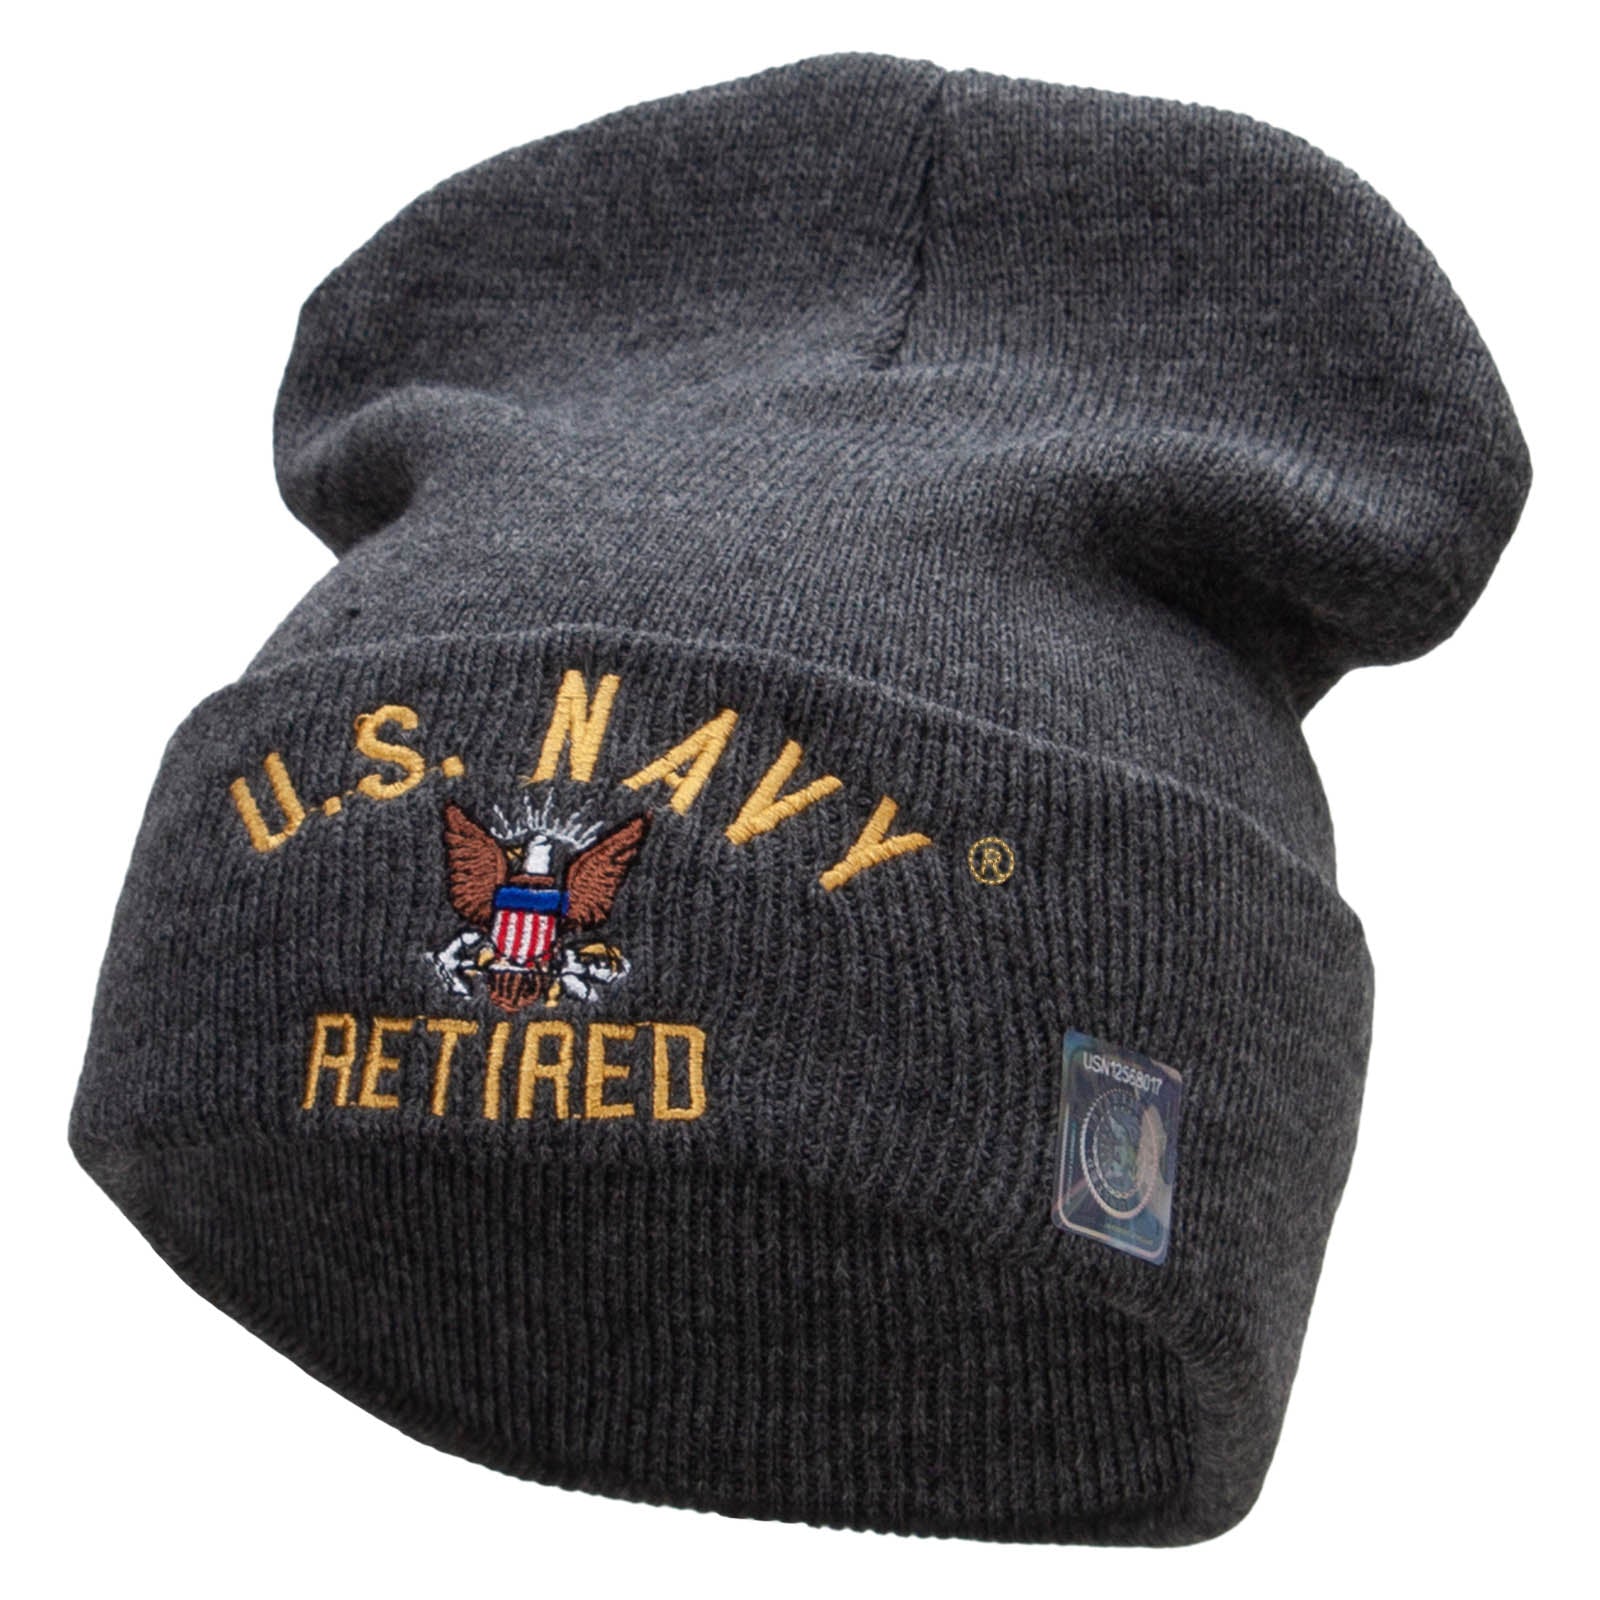 Licensed US Navy Retired Military Embroidered Long Beanie Made in USA - Dk Grey OSFM